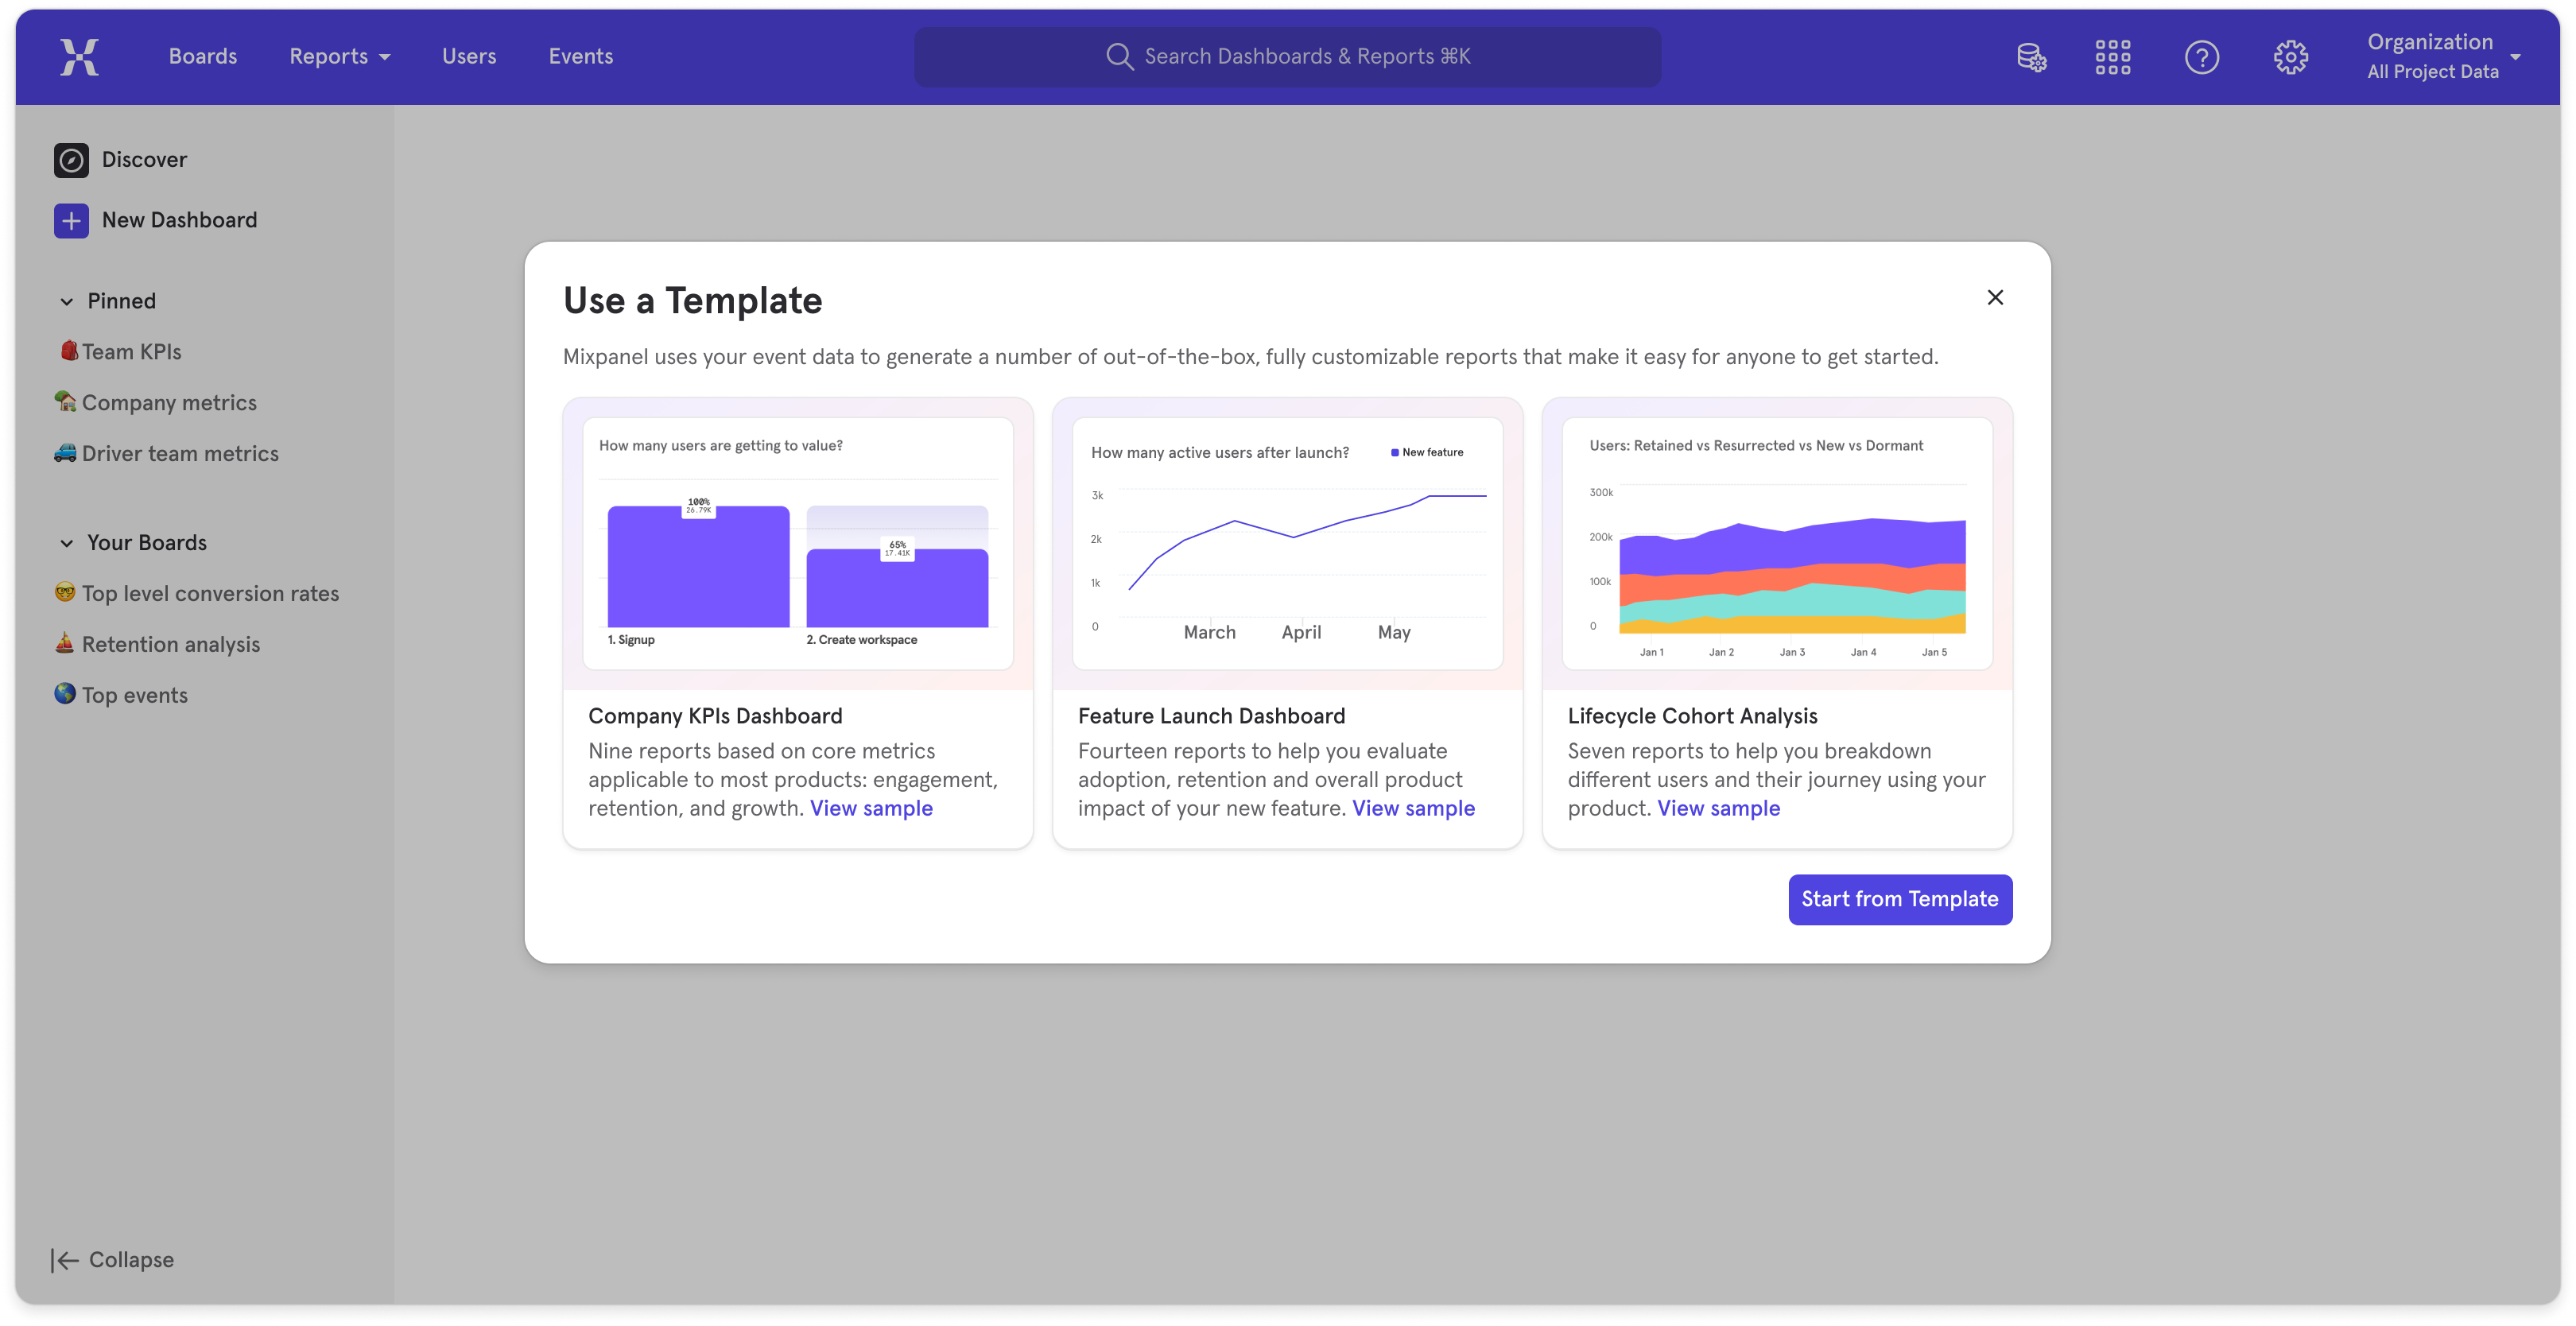 Mixpanel's "Use a Template" screen, where you can choose to create a new Board from the Company KPIs, Feature Launch, and Lifecycle Cohort Analysis templates.